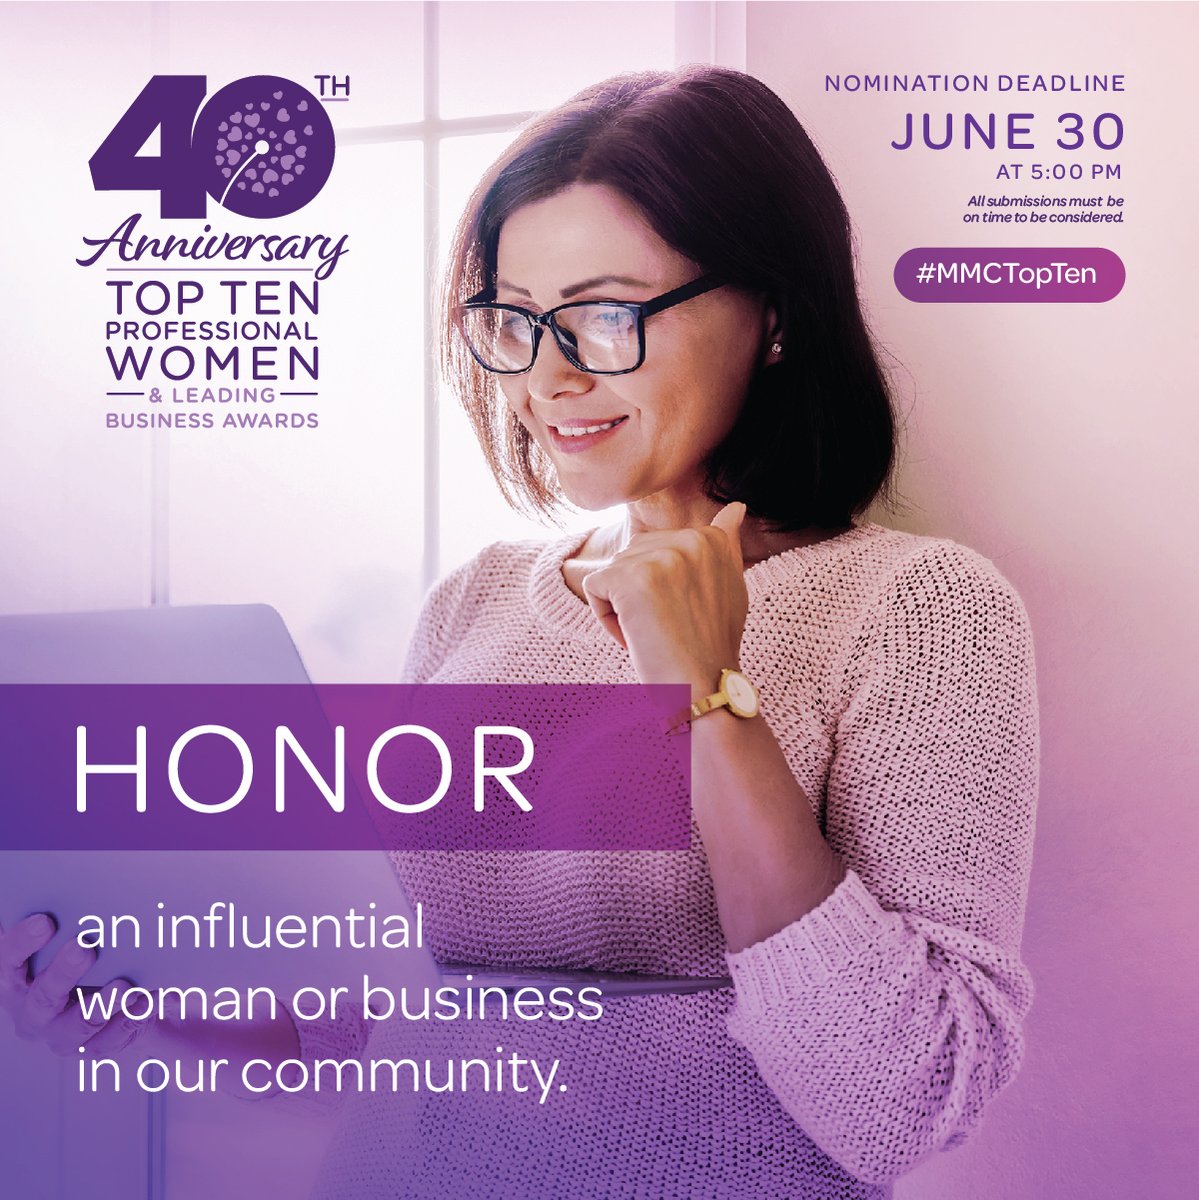 Nominate a professional woman or a leading business making a positive impact in the community for our 40th #MMCTopTen2023 Award! 

Click here to nominate: mmcenter.org/top-ten 

#MMCTopTen #ProfessionalWomen #LeadingBusiness #Awards #nominate